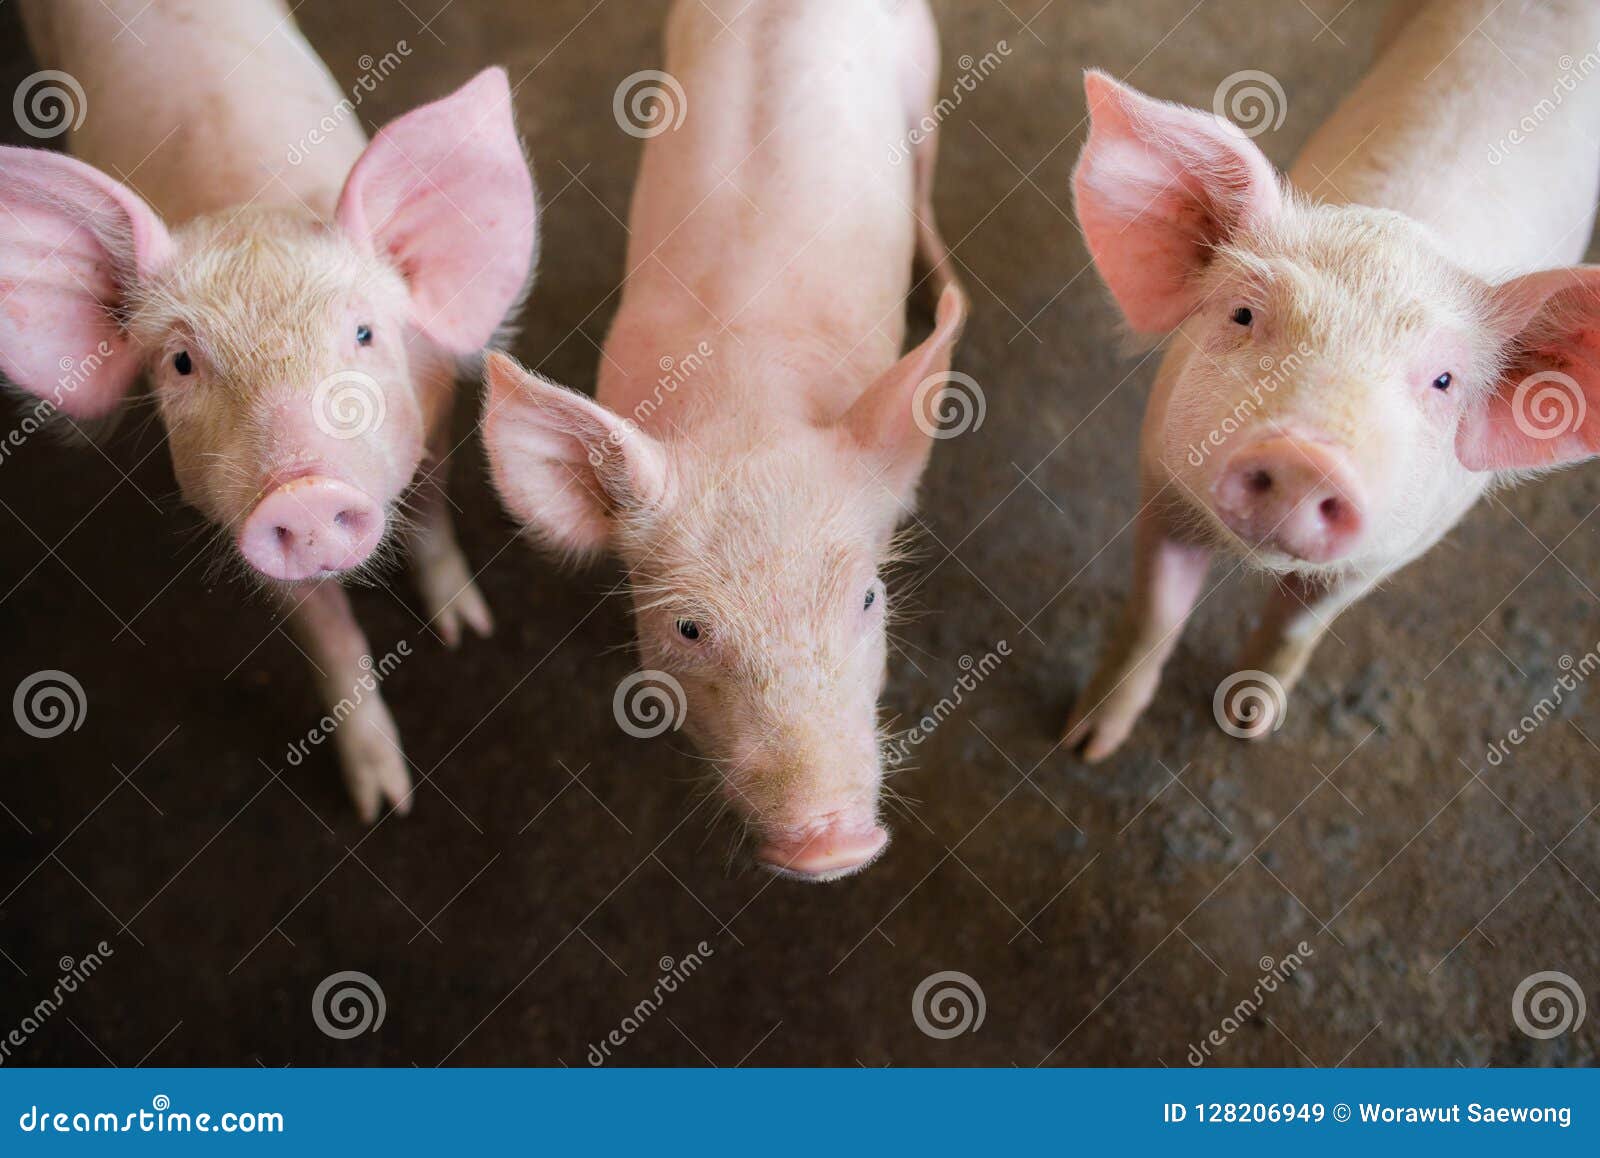 swine at the farm. meat industry. pig farming to meet the growing demand for meat in thailand and international.